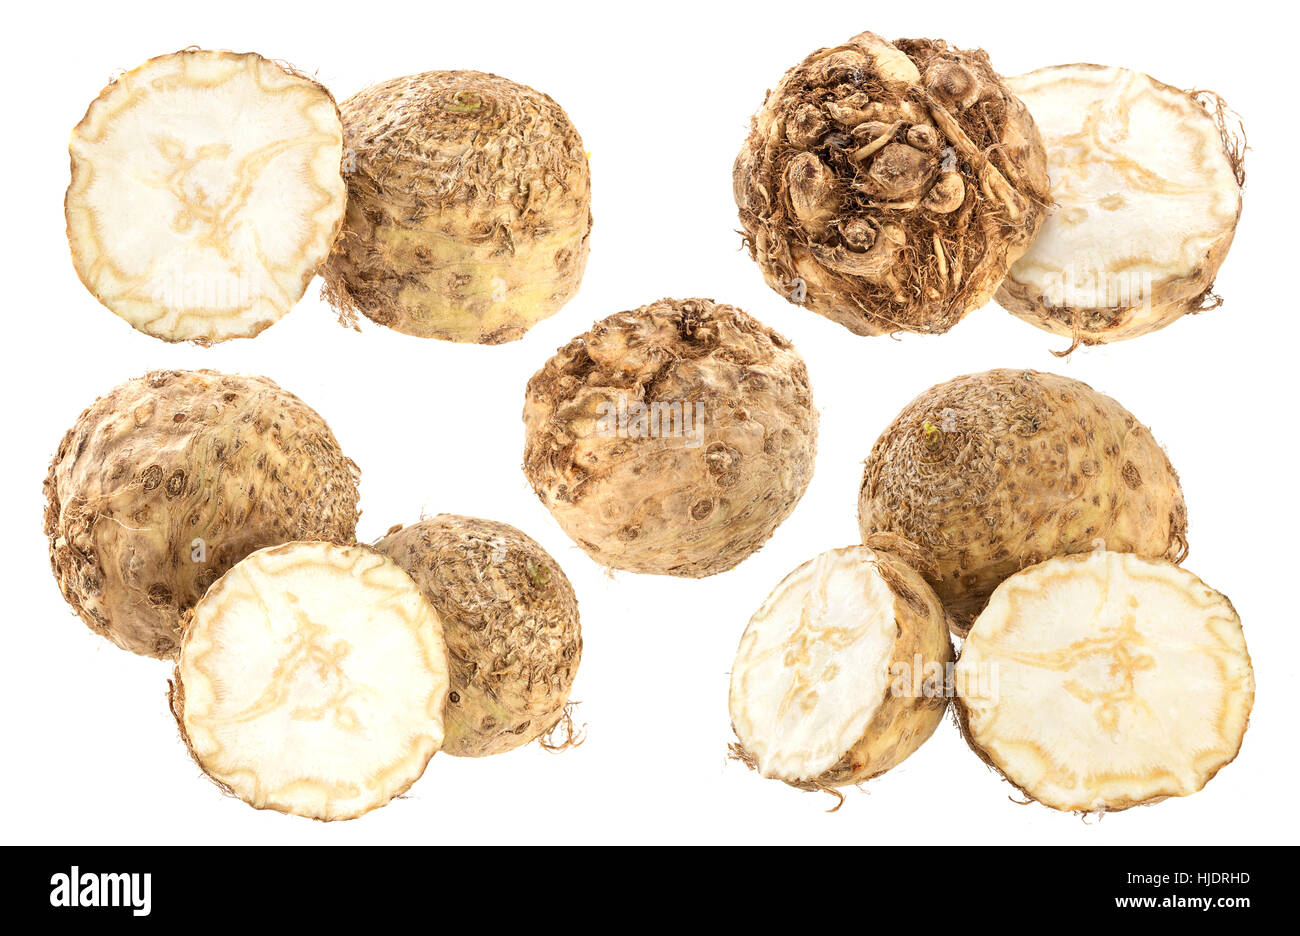 Celery root isolated on a white background Stock Photo